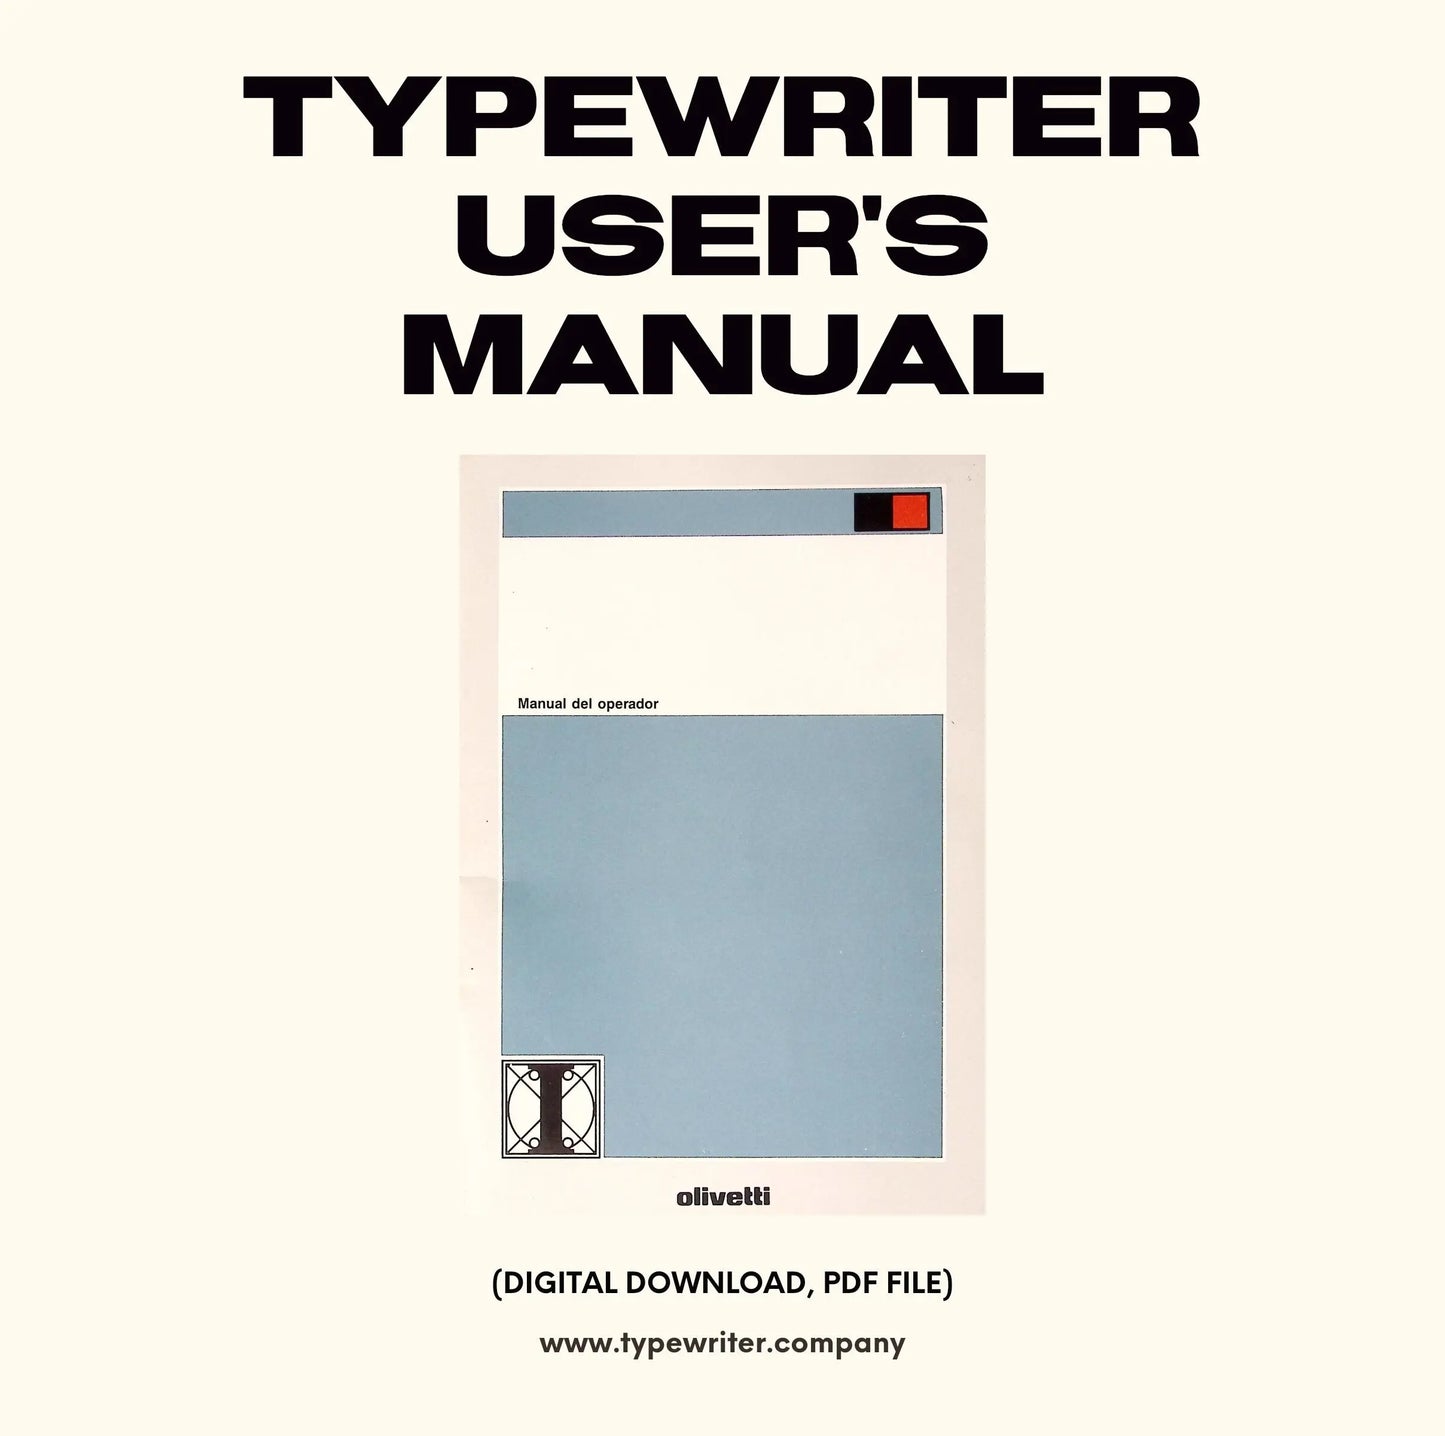 Typewriter Instruction Manual, for User/Owner - Olivetti Typewriter, ET series, DeLuxe 11, E501, in Spanish, Instant download, Digital Copy. - ElGranero Typewriter.Company